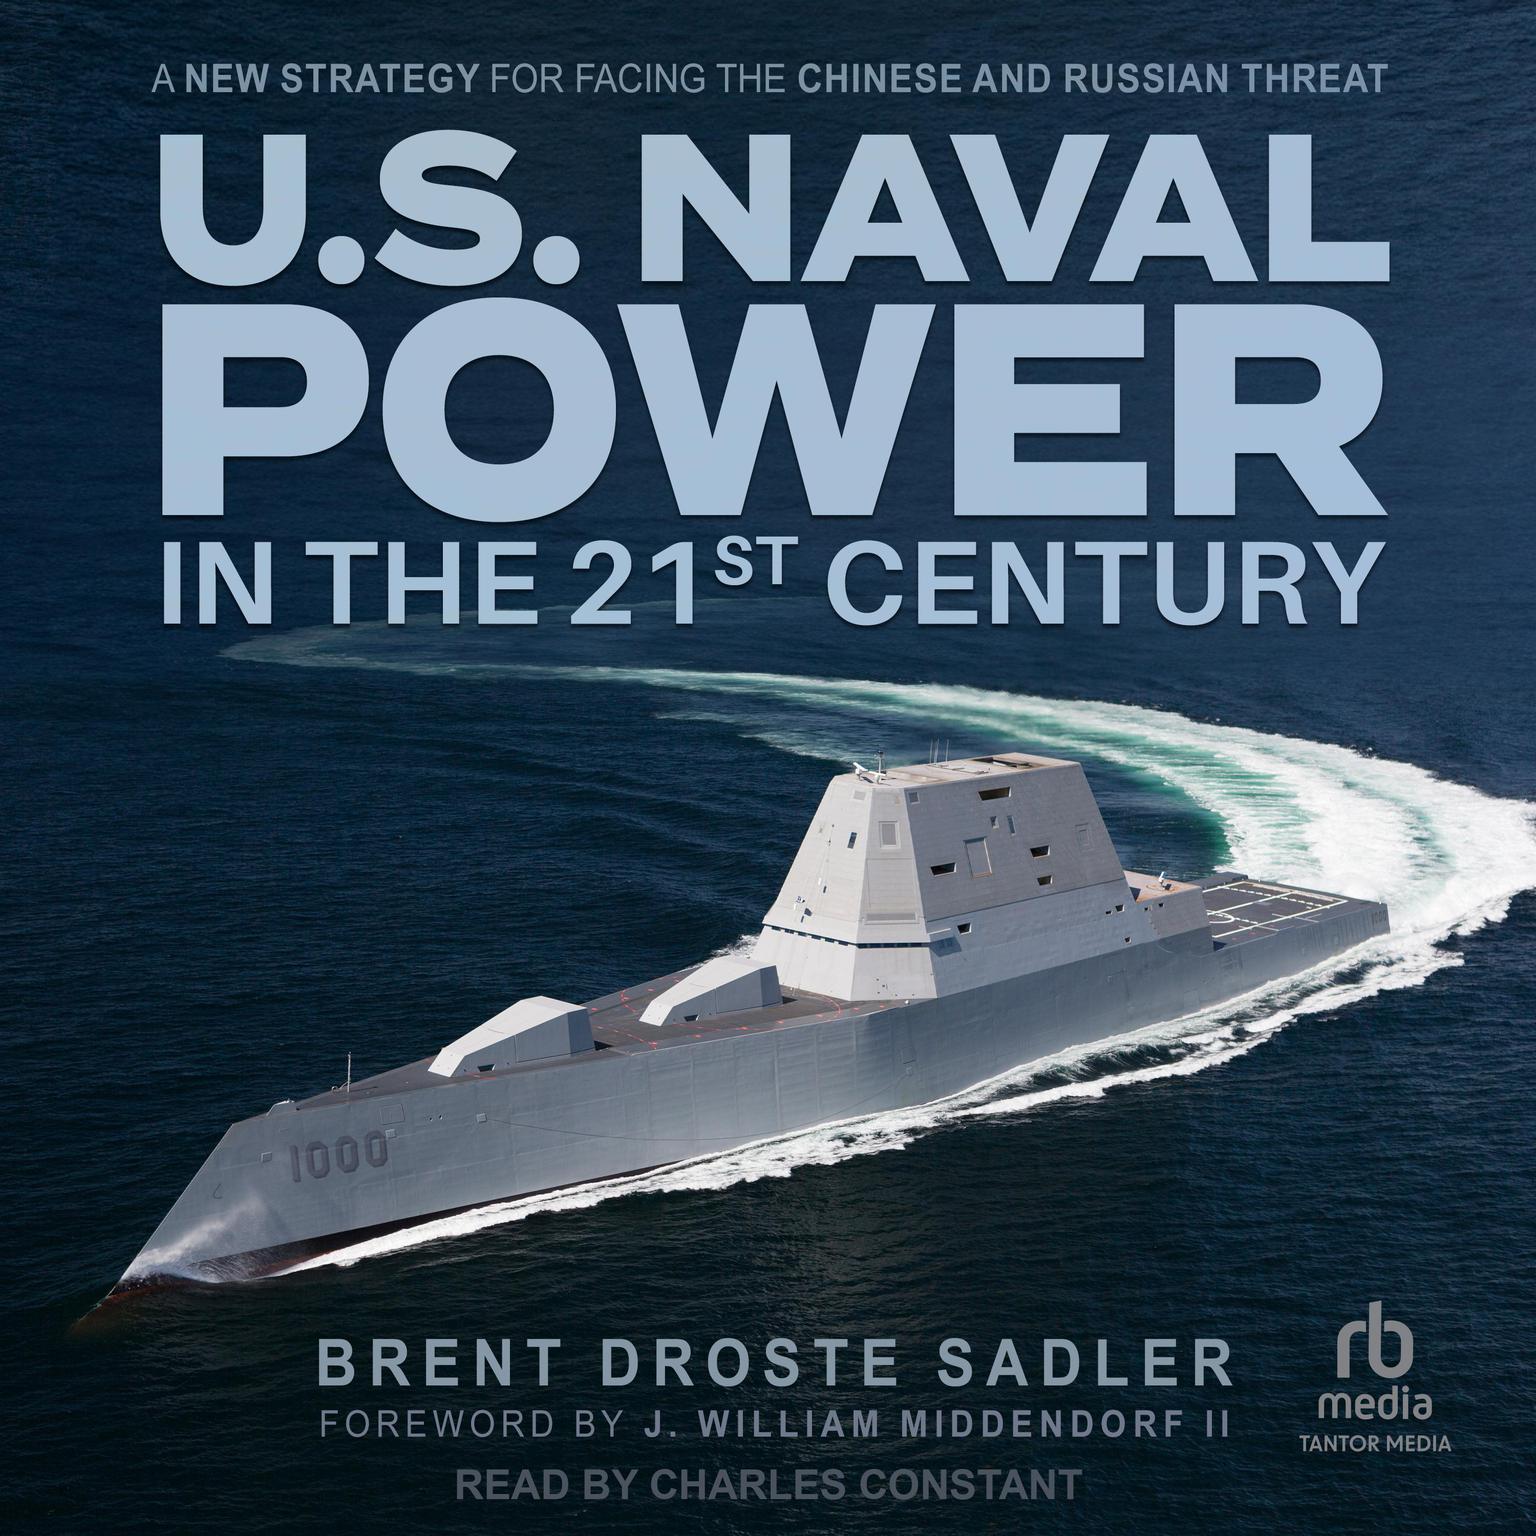 U.S. Naval Power in the 21st Century: A New Strategy for Facing the Chinese and Russian Threat Audiobook, by Brent Droste Sadler